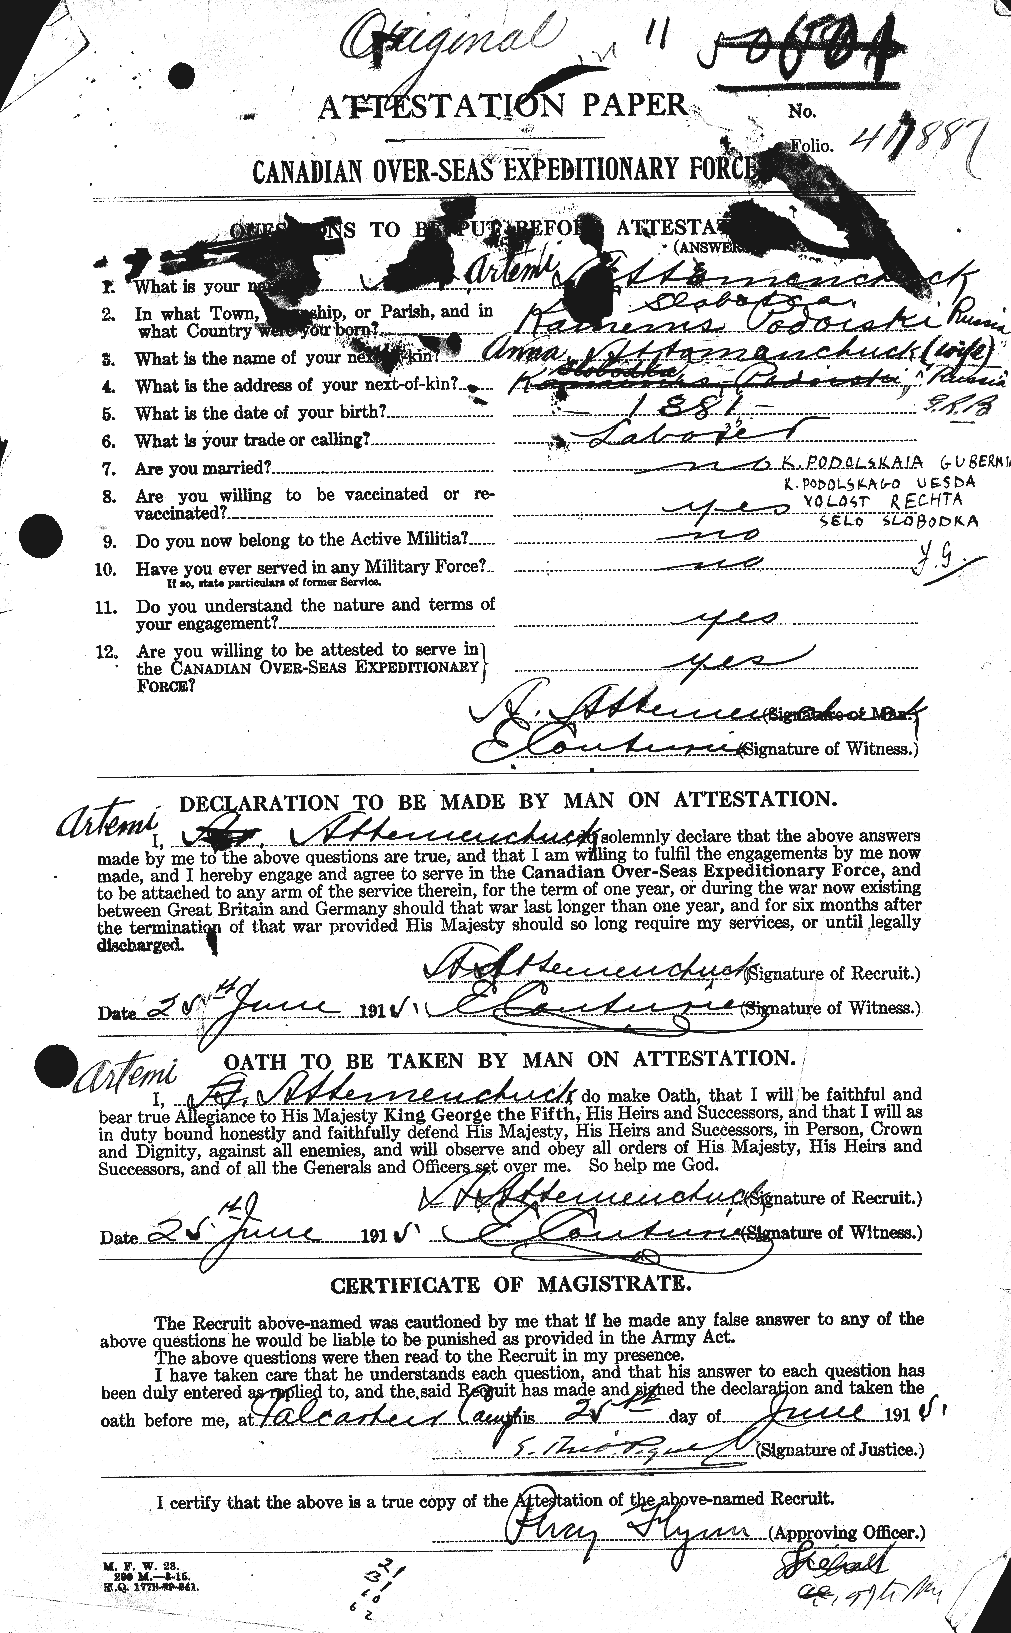 Personnel Records of the First World War - CEF 224132a